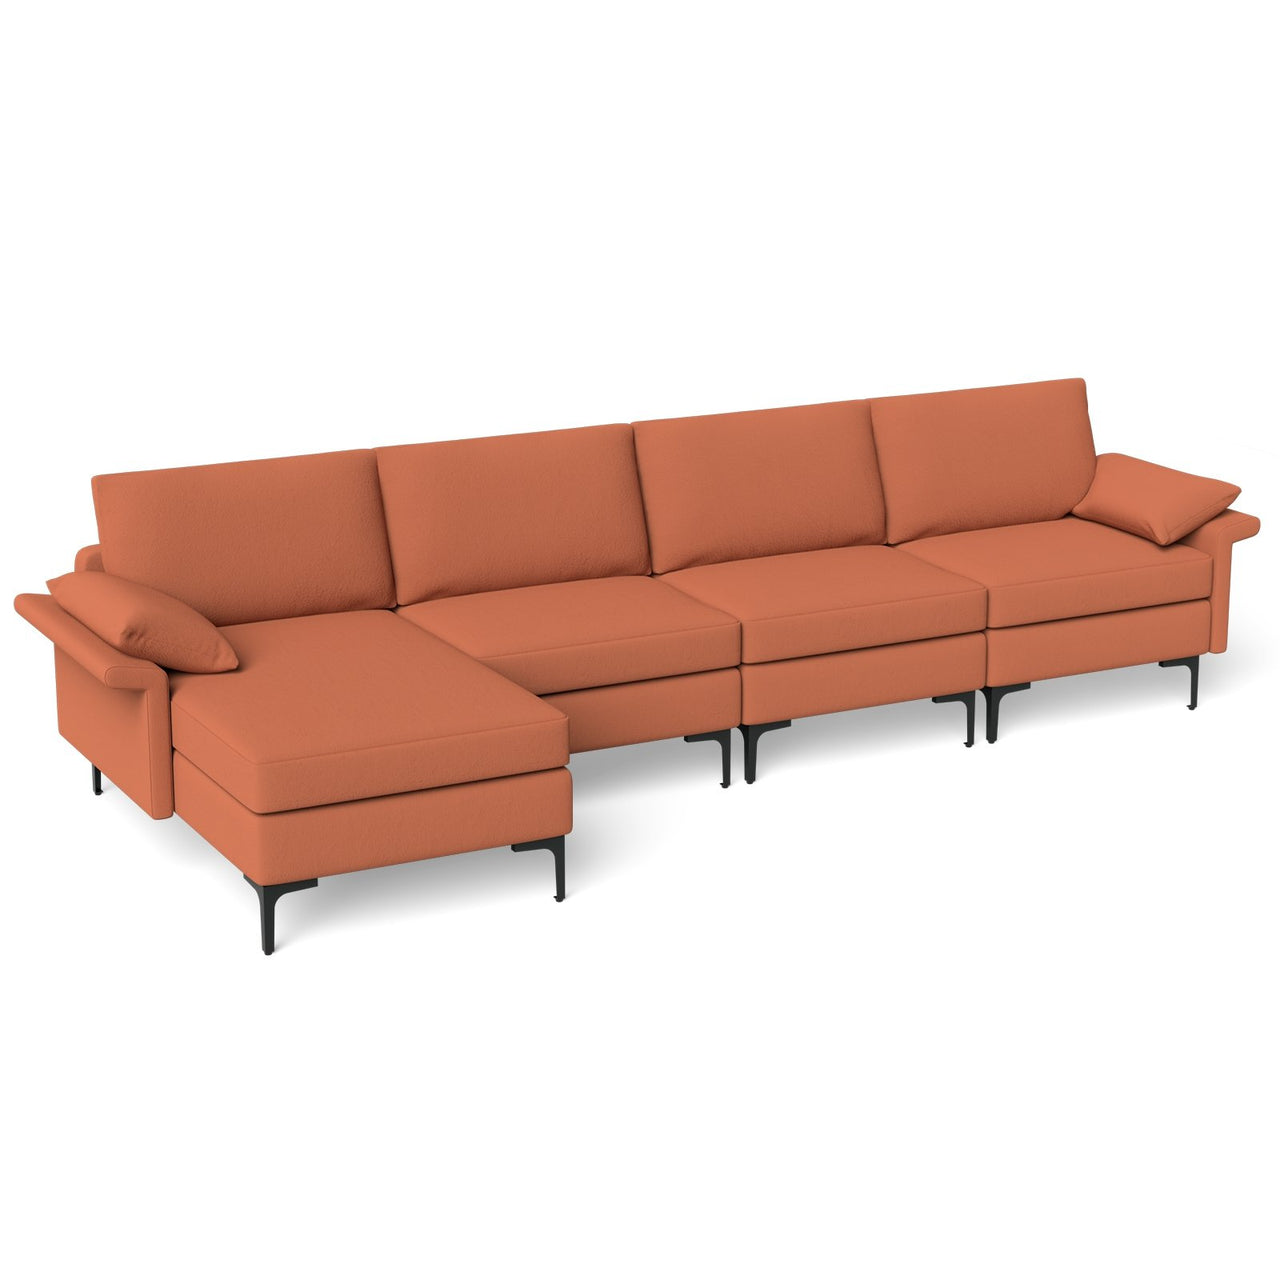 Extra Large L-shaped Sectional Sofa with Reversible Chaise - Gallery View 1 of 11